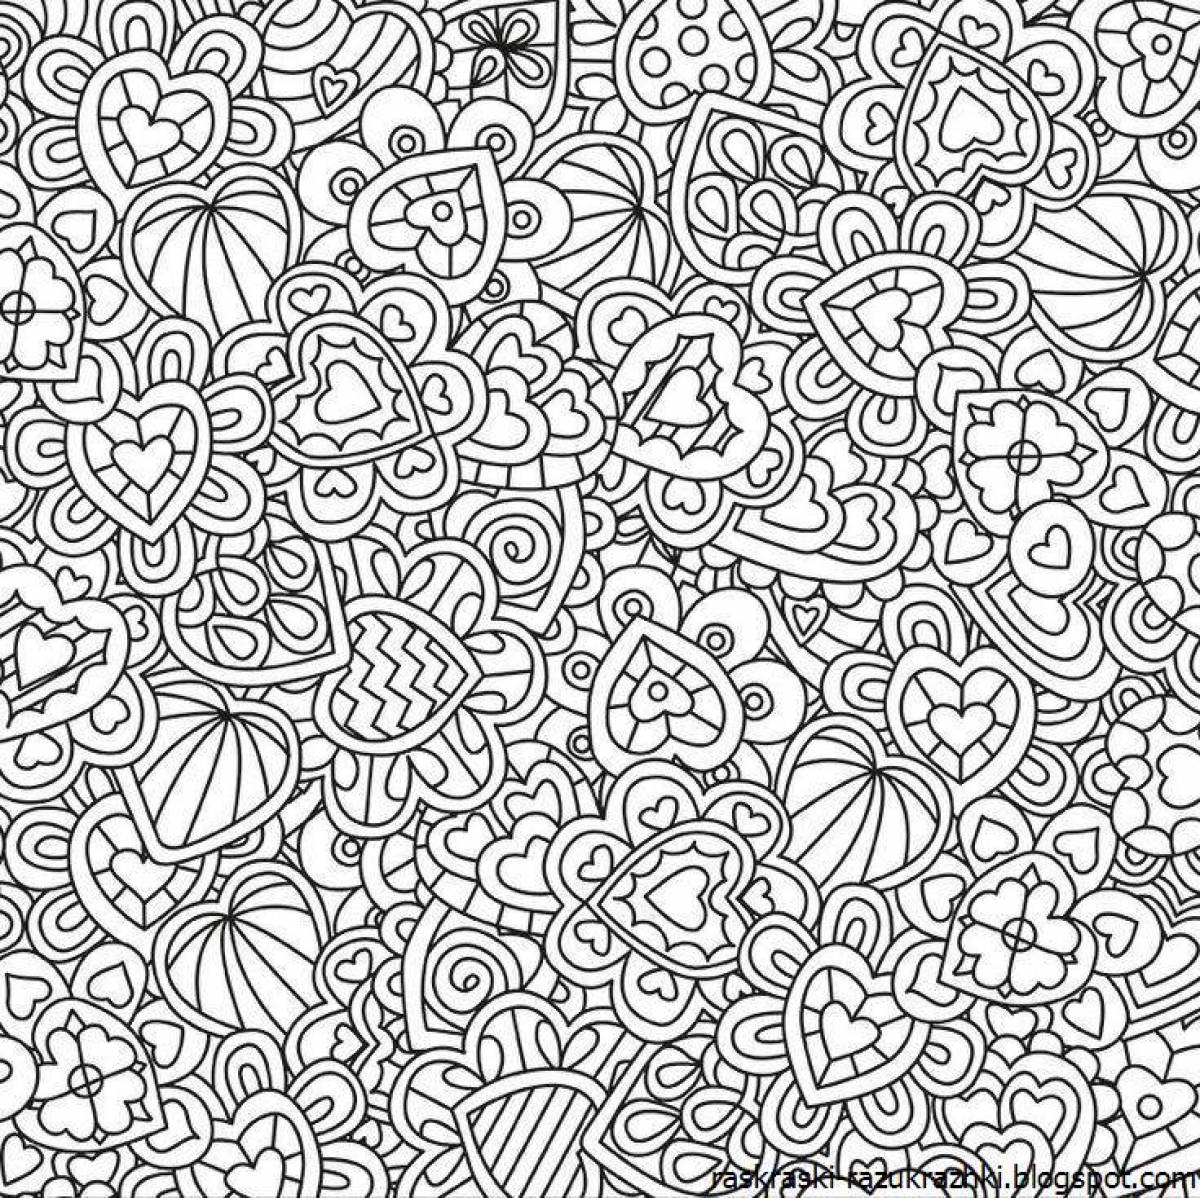 Great coloring book, small